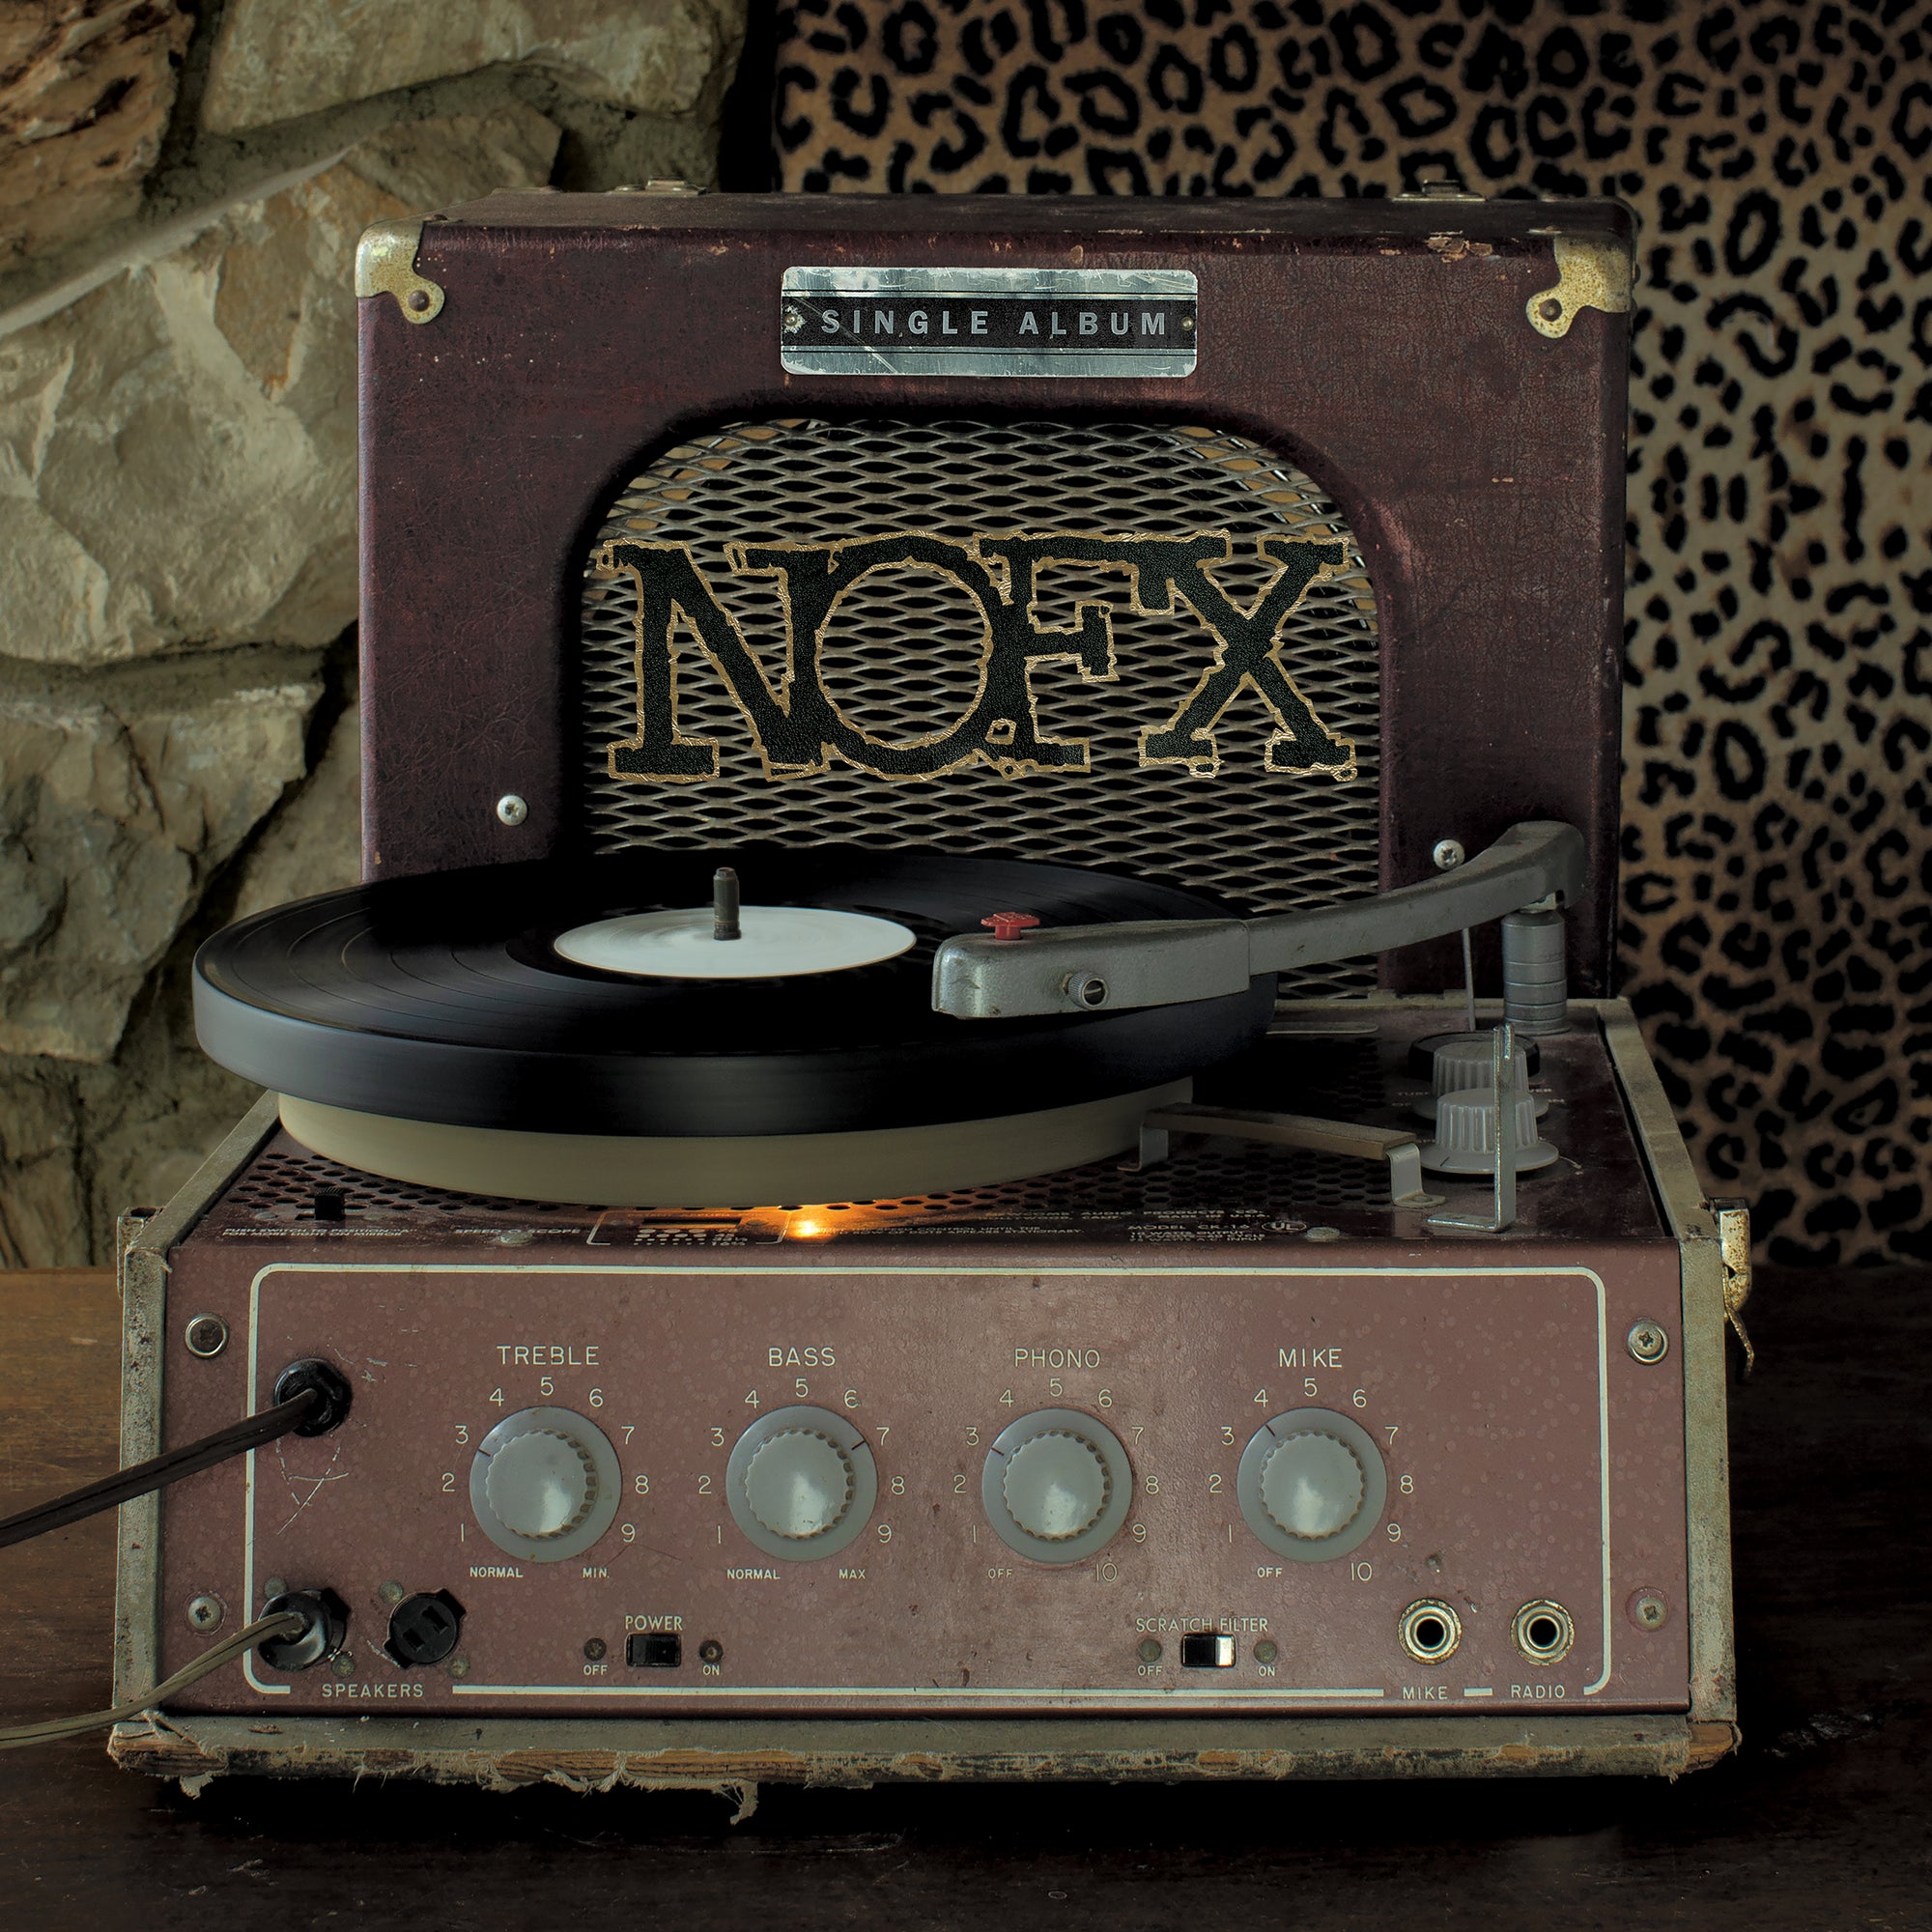 NOFX 2019 7 of the Month Club #11 COLOR VINYL Record non single album  songs NEW